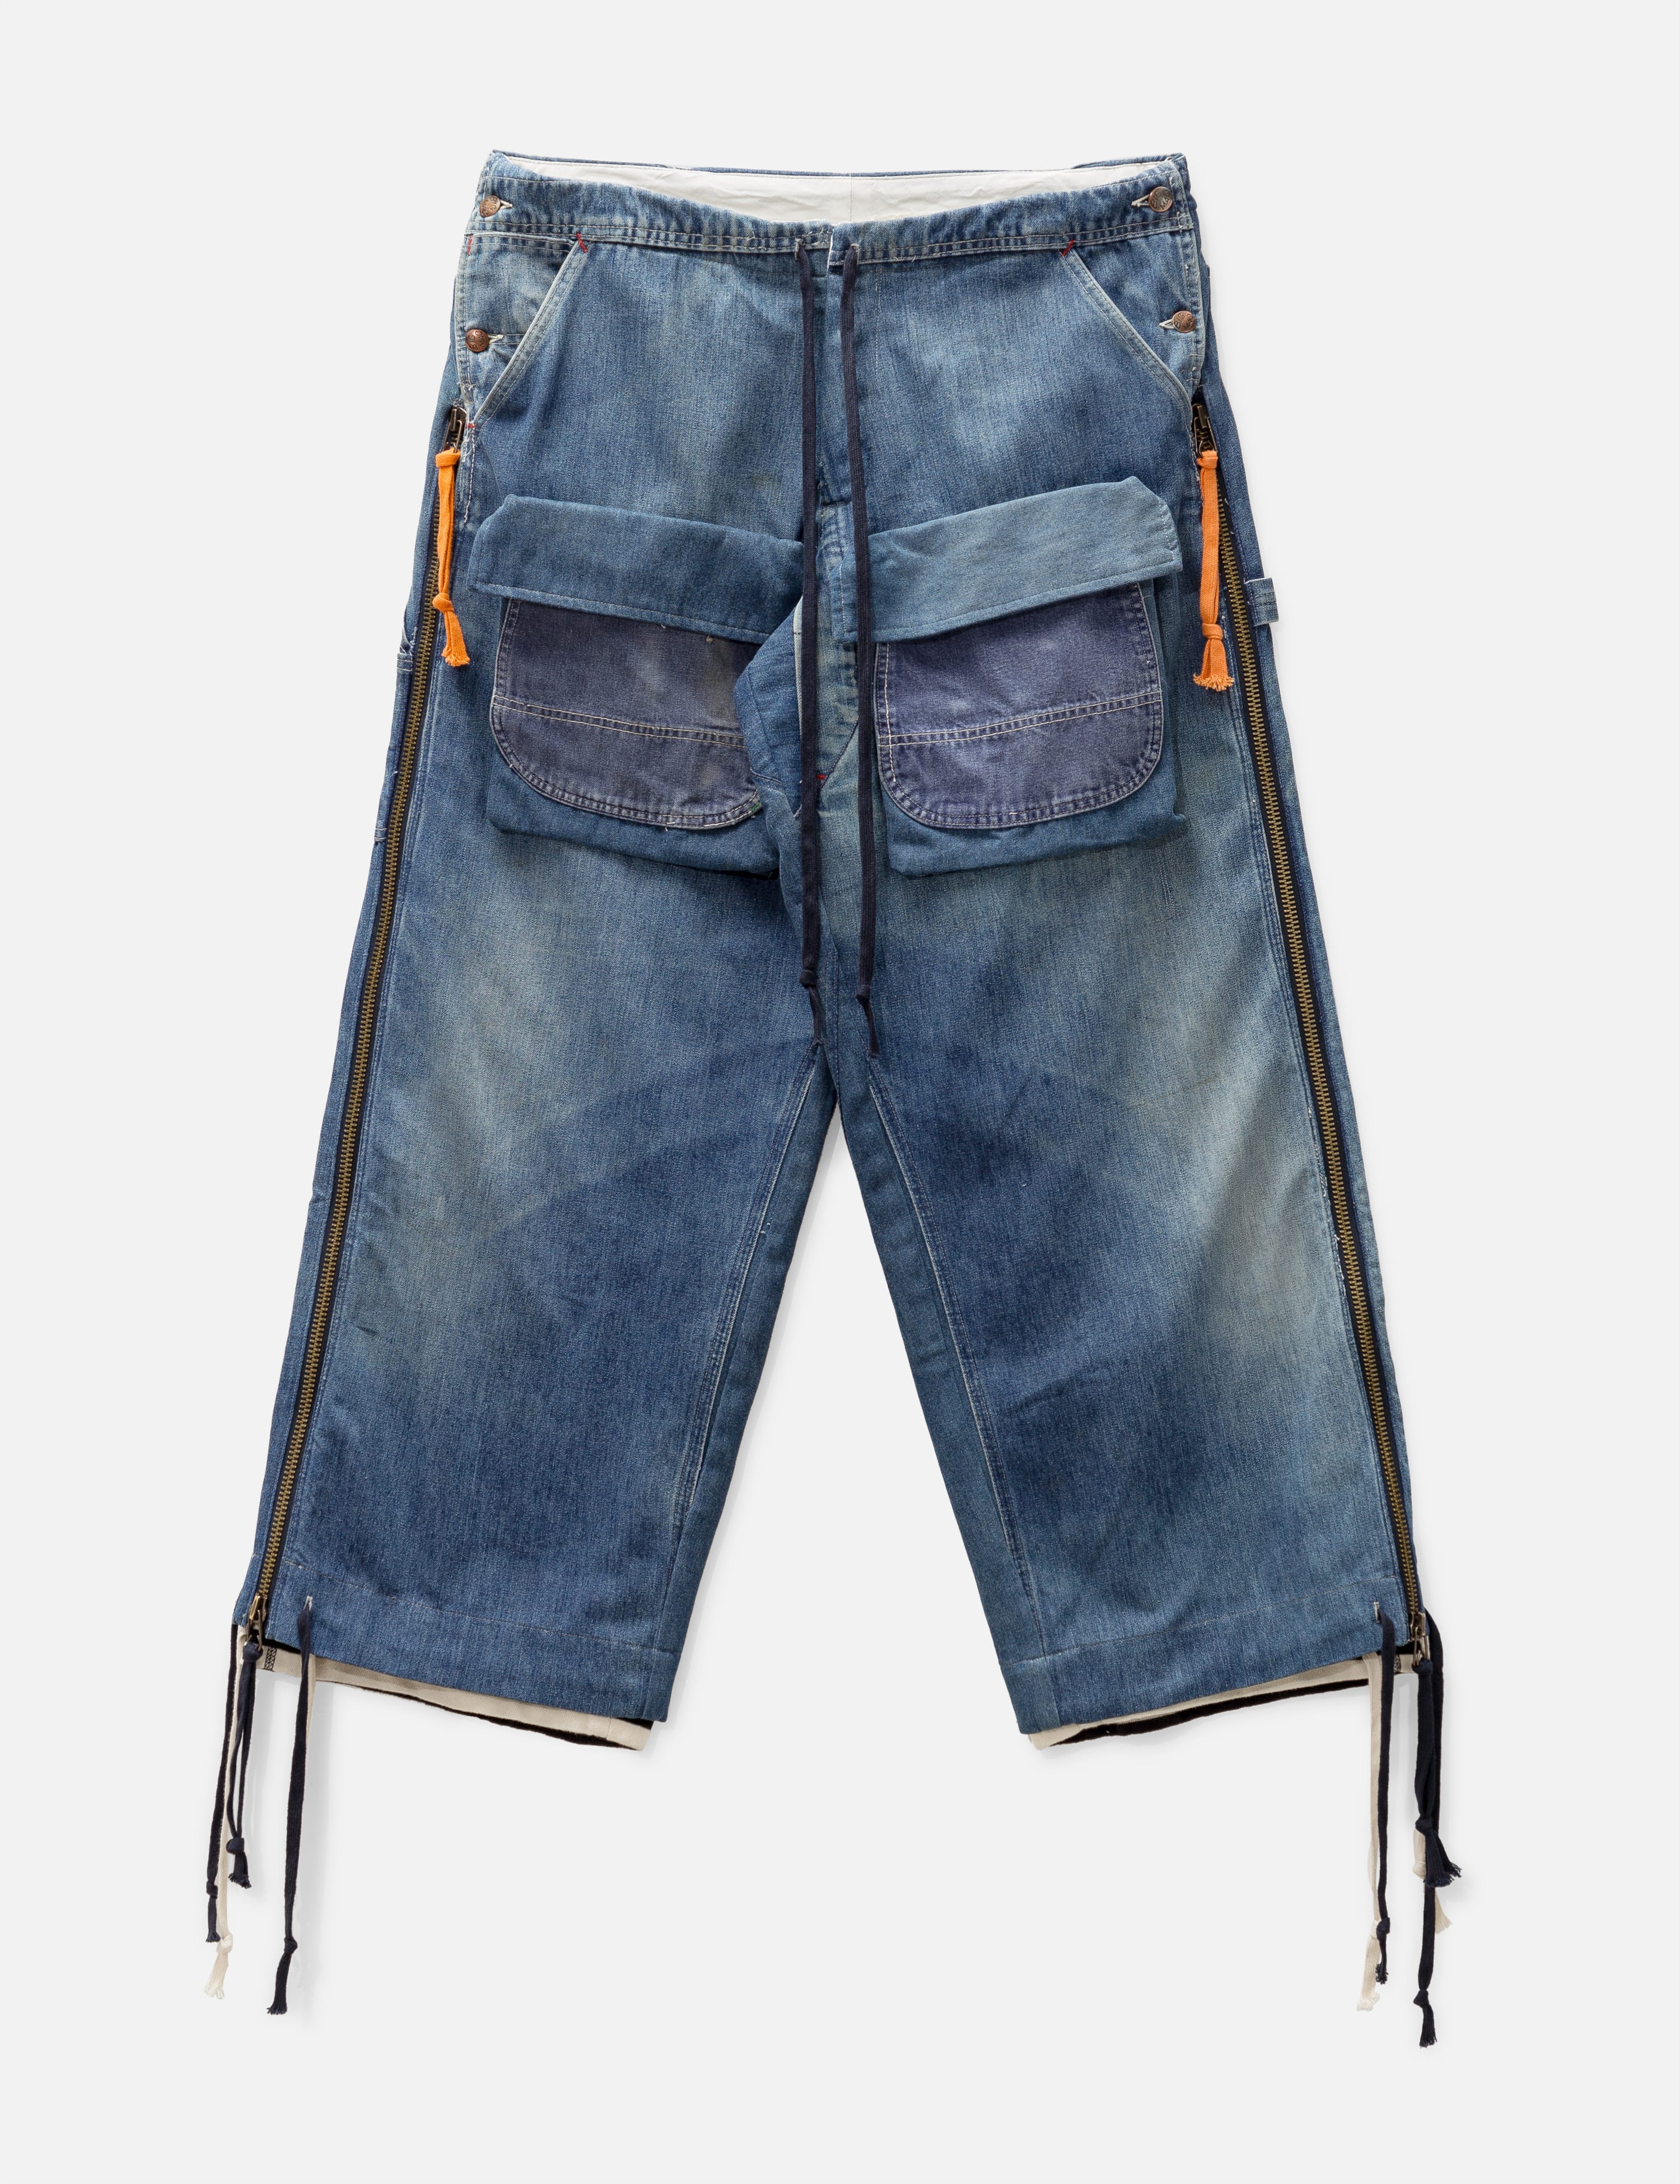 Jeans | HBX - Globally Curated Fashion and Lifestyle by Hypebeast